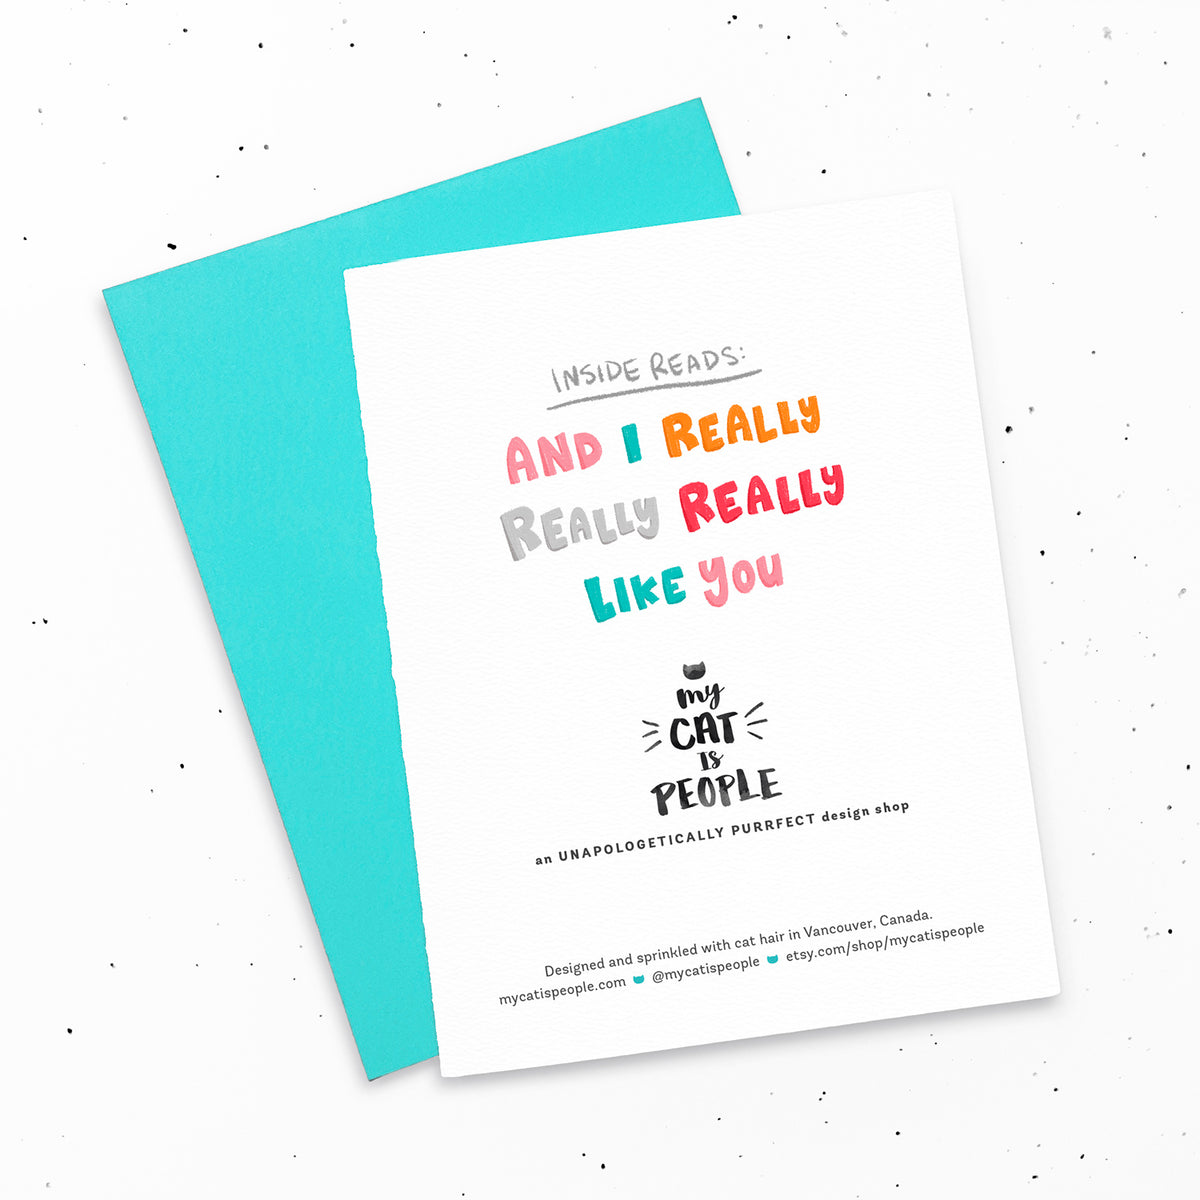 I really, really, really like you ~ Cute greeting card for new friendships and relationships by My Cat Is People